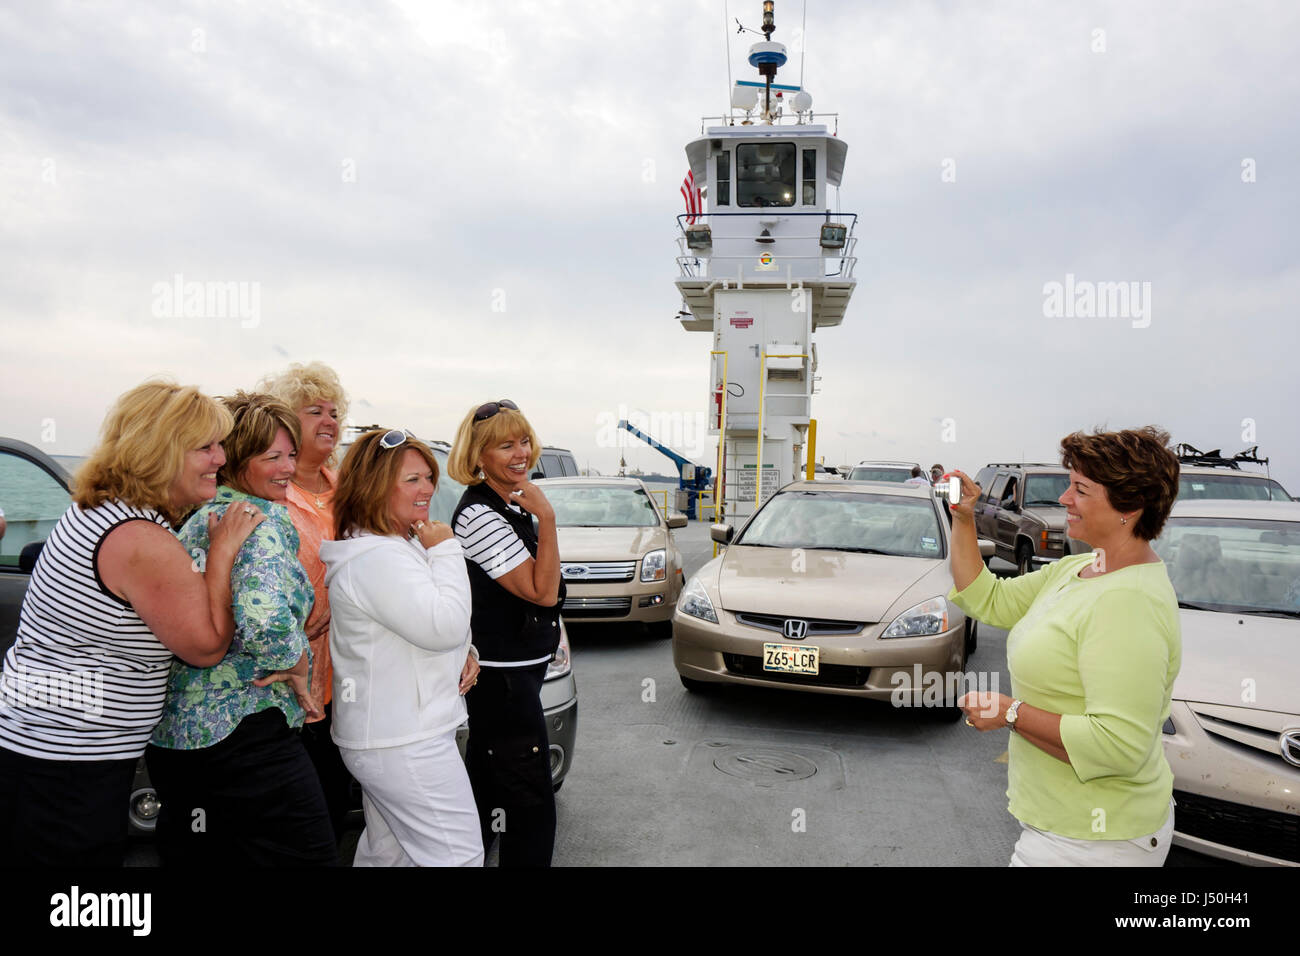 Alabama Fort Morgan,Fort Morgan Ferry,Mobile Bay water,adult adults woman women female lady,women,friends,group,girlfriends' day,ham it up,posing,pose Stock Photo